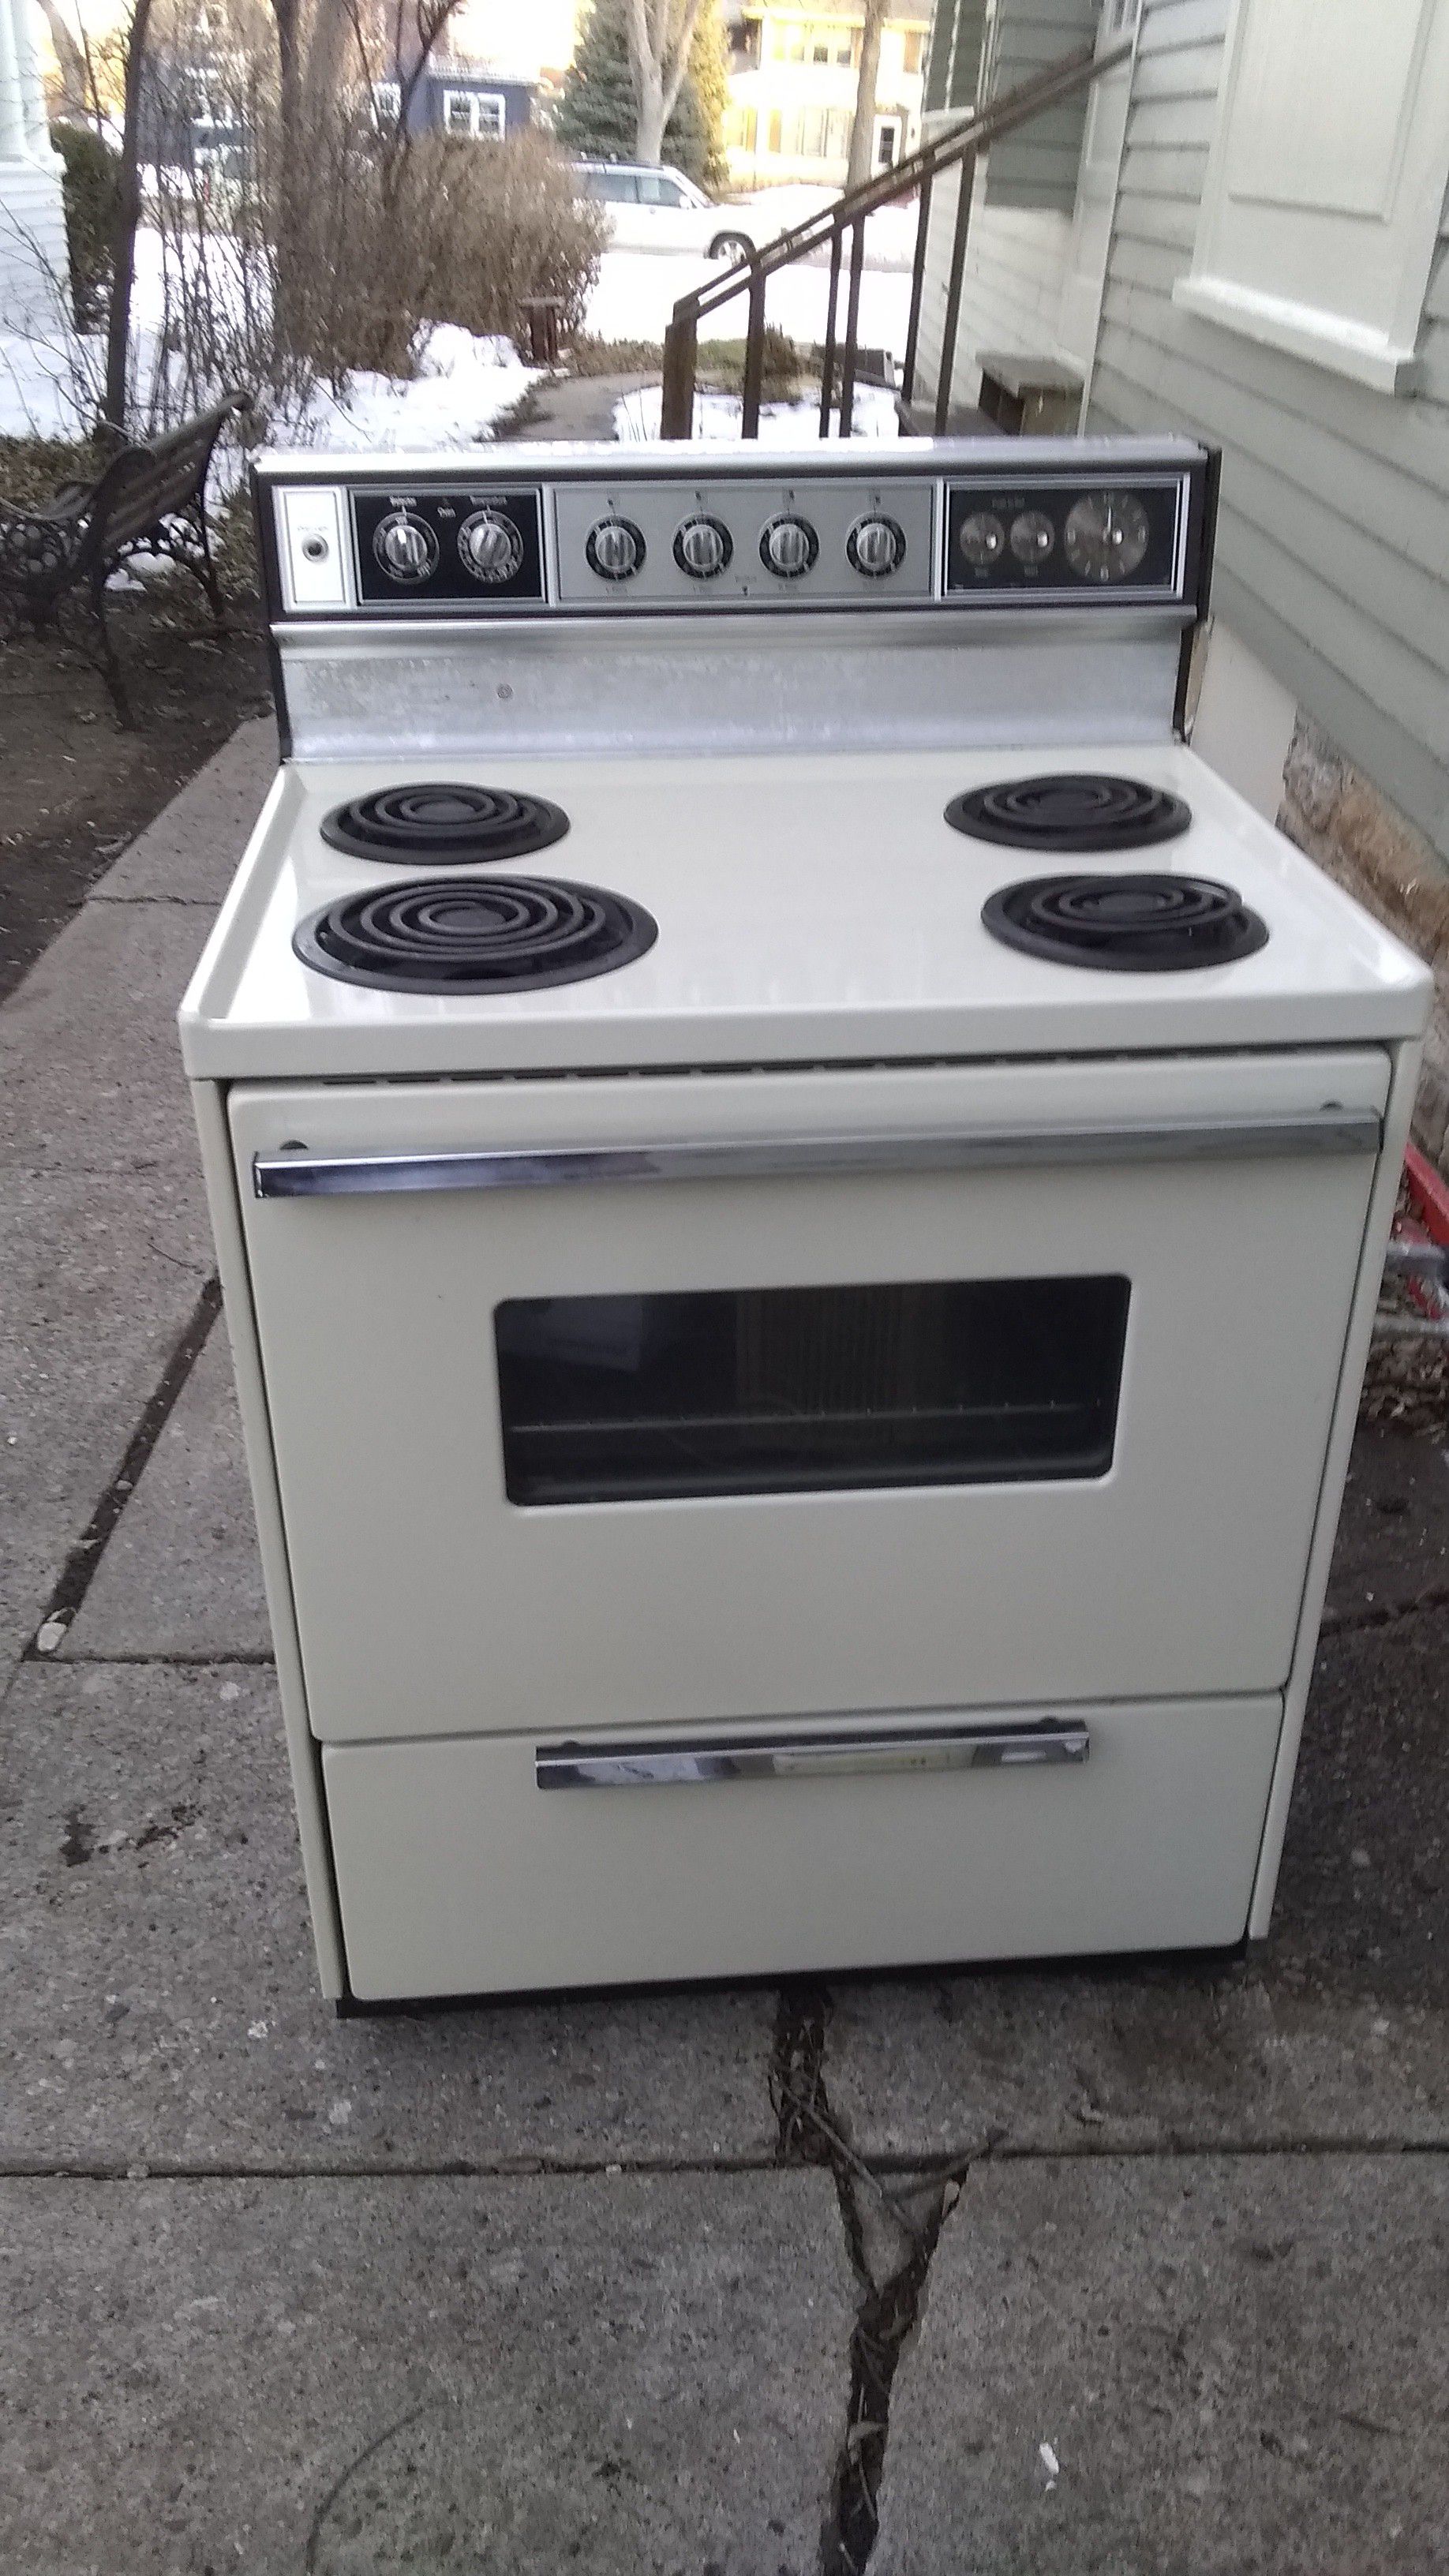 Electric oven runs like a champ 50 bucks or best offer